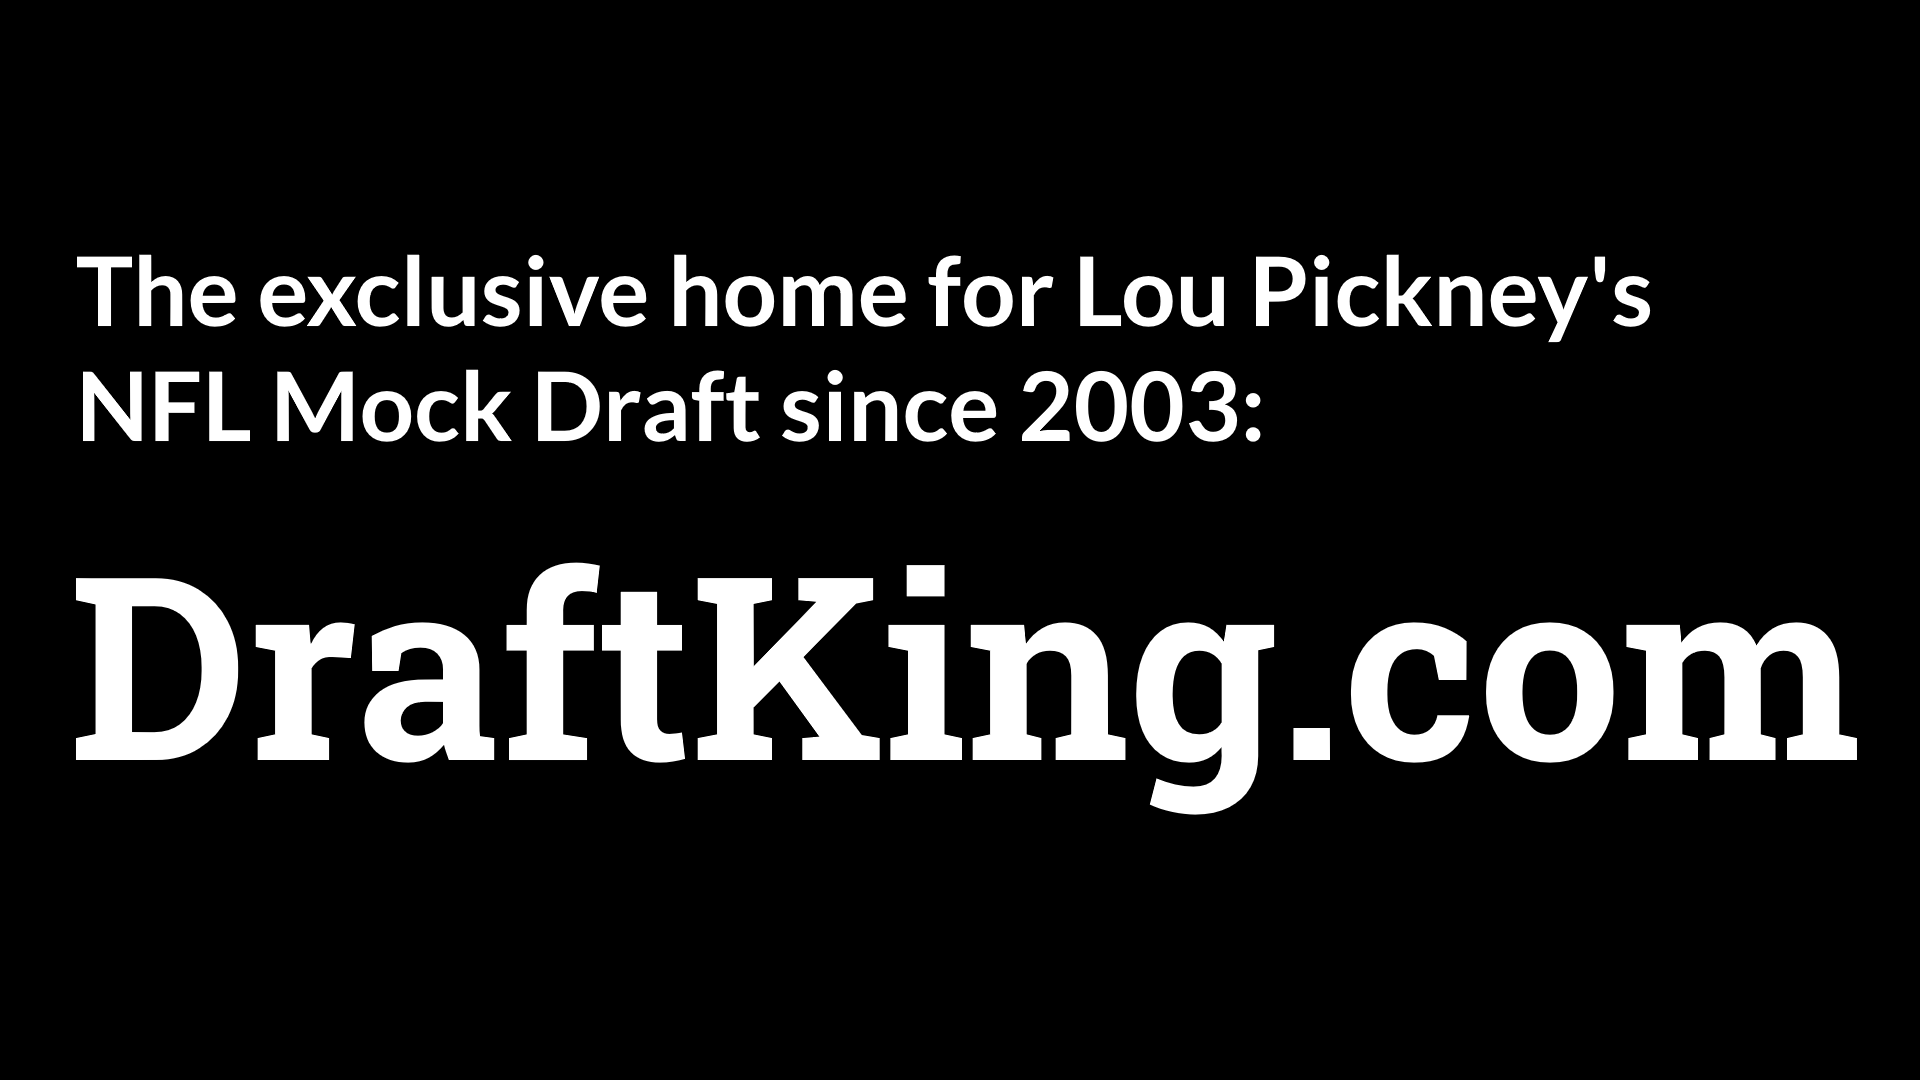 The exclusive home for Lou Pickney's NFL Mock Draft since 2003: DraftKing.com